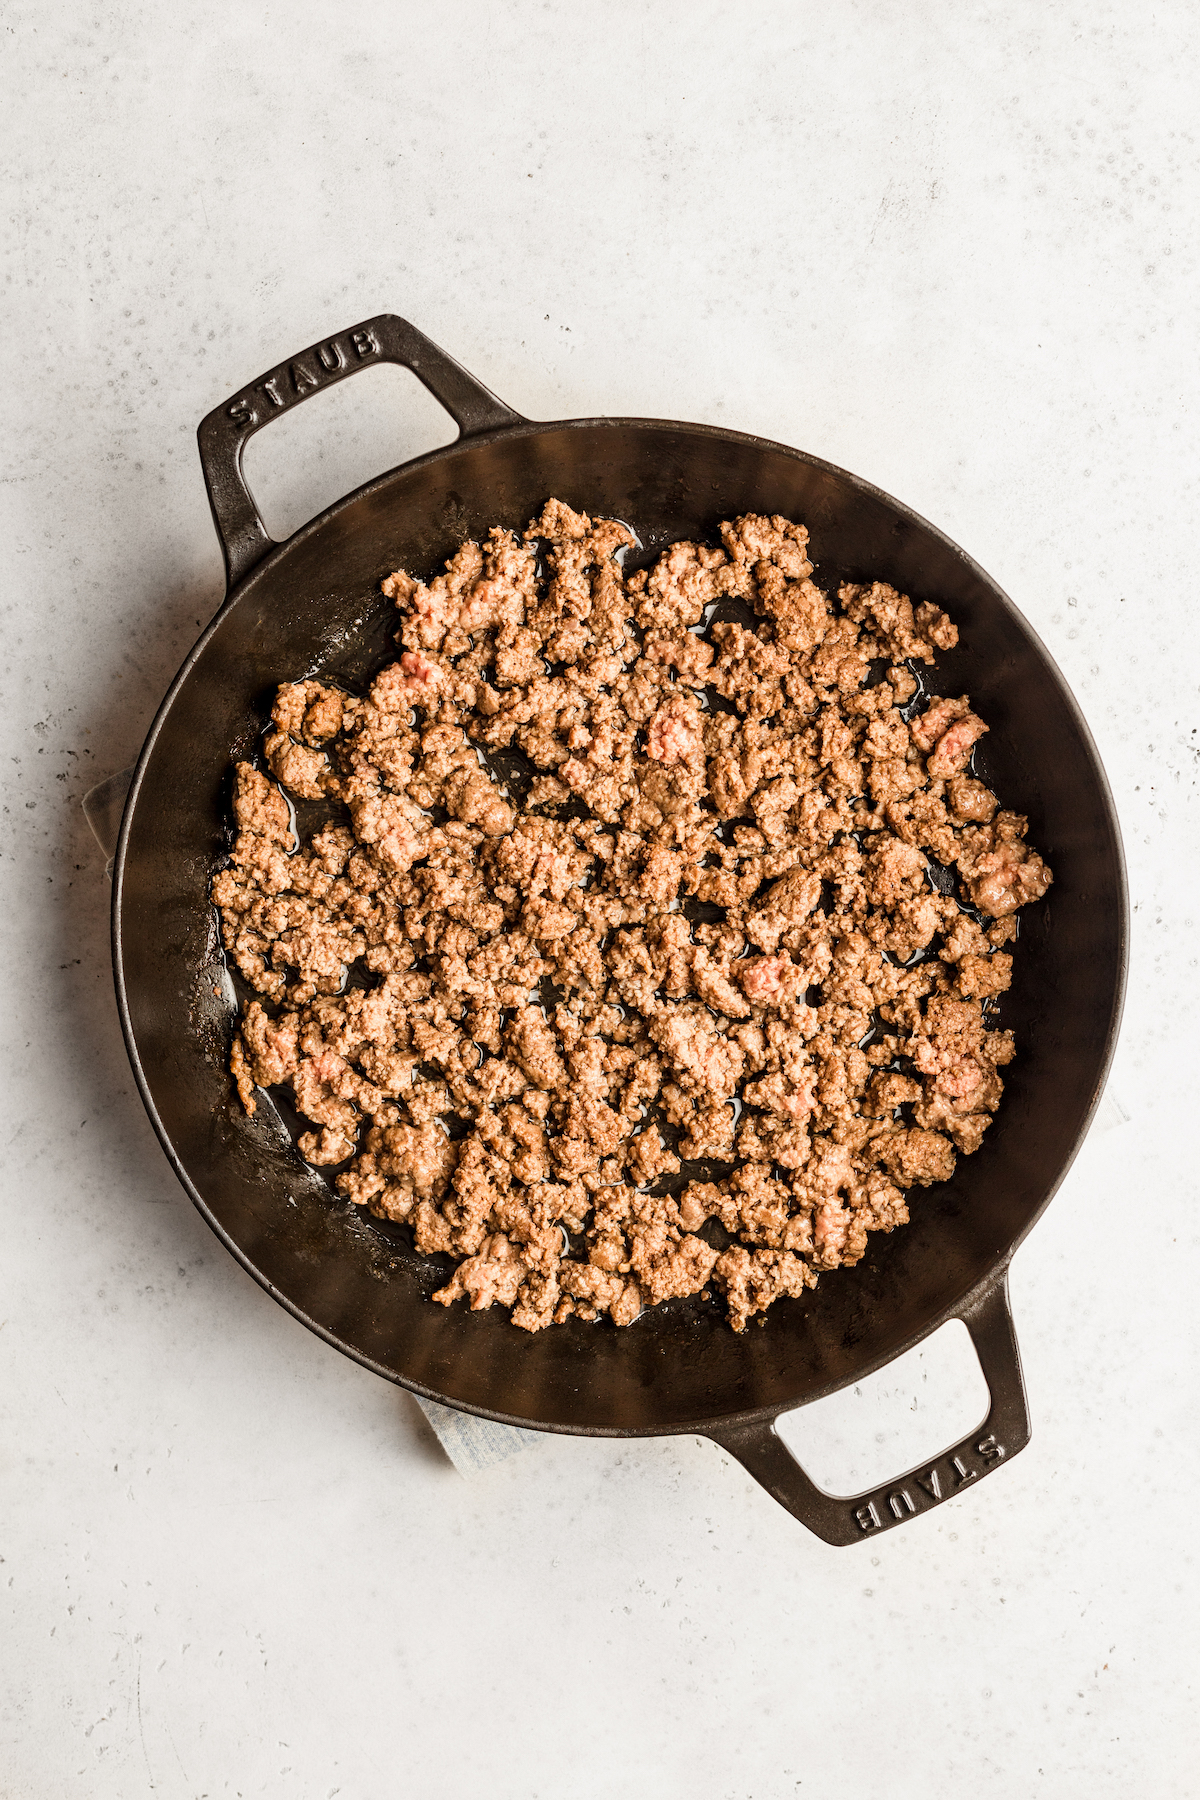 Cooked ground beef in a double-handled skillet.